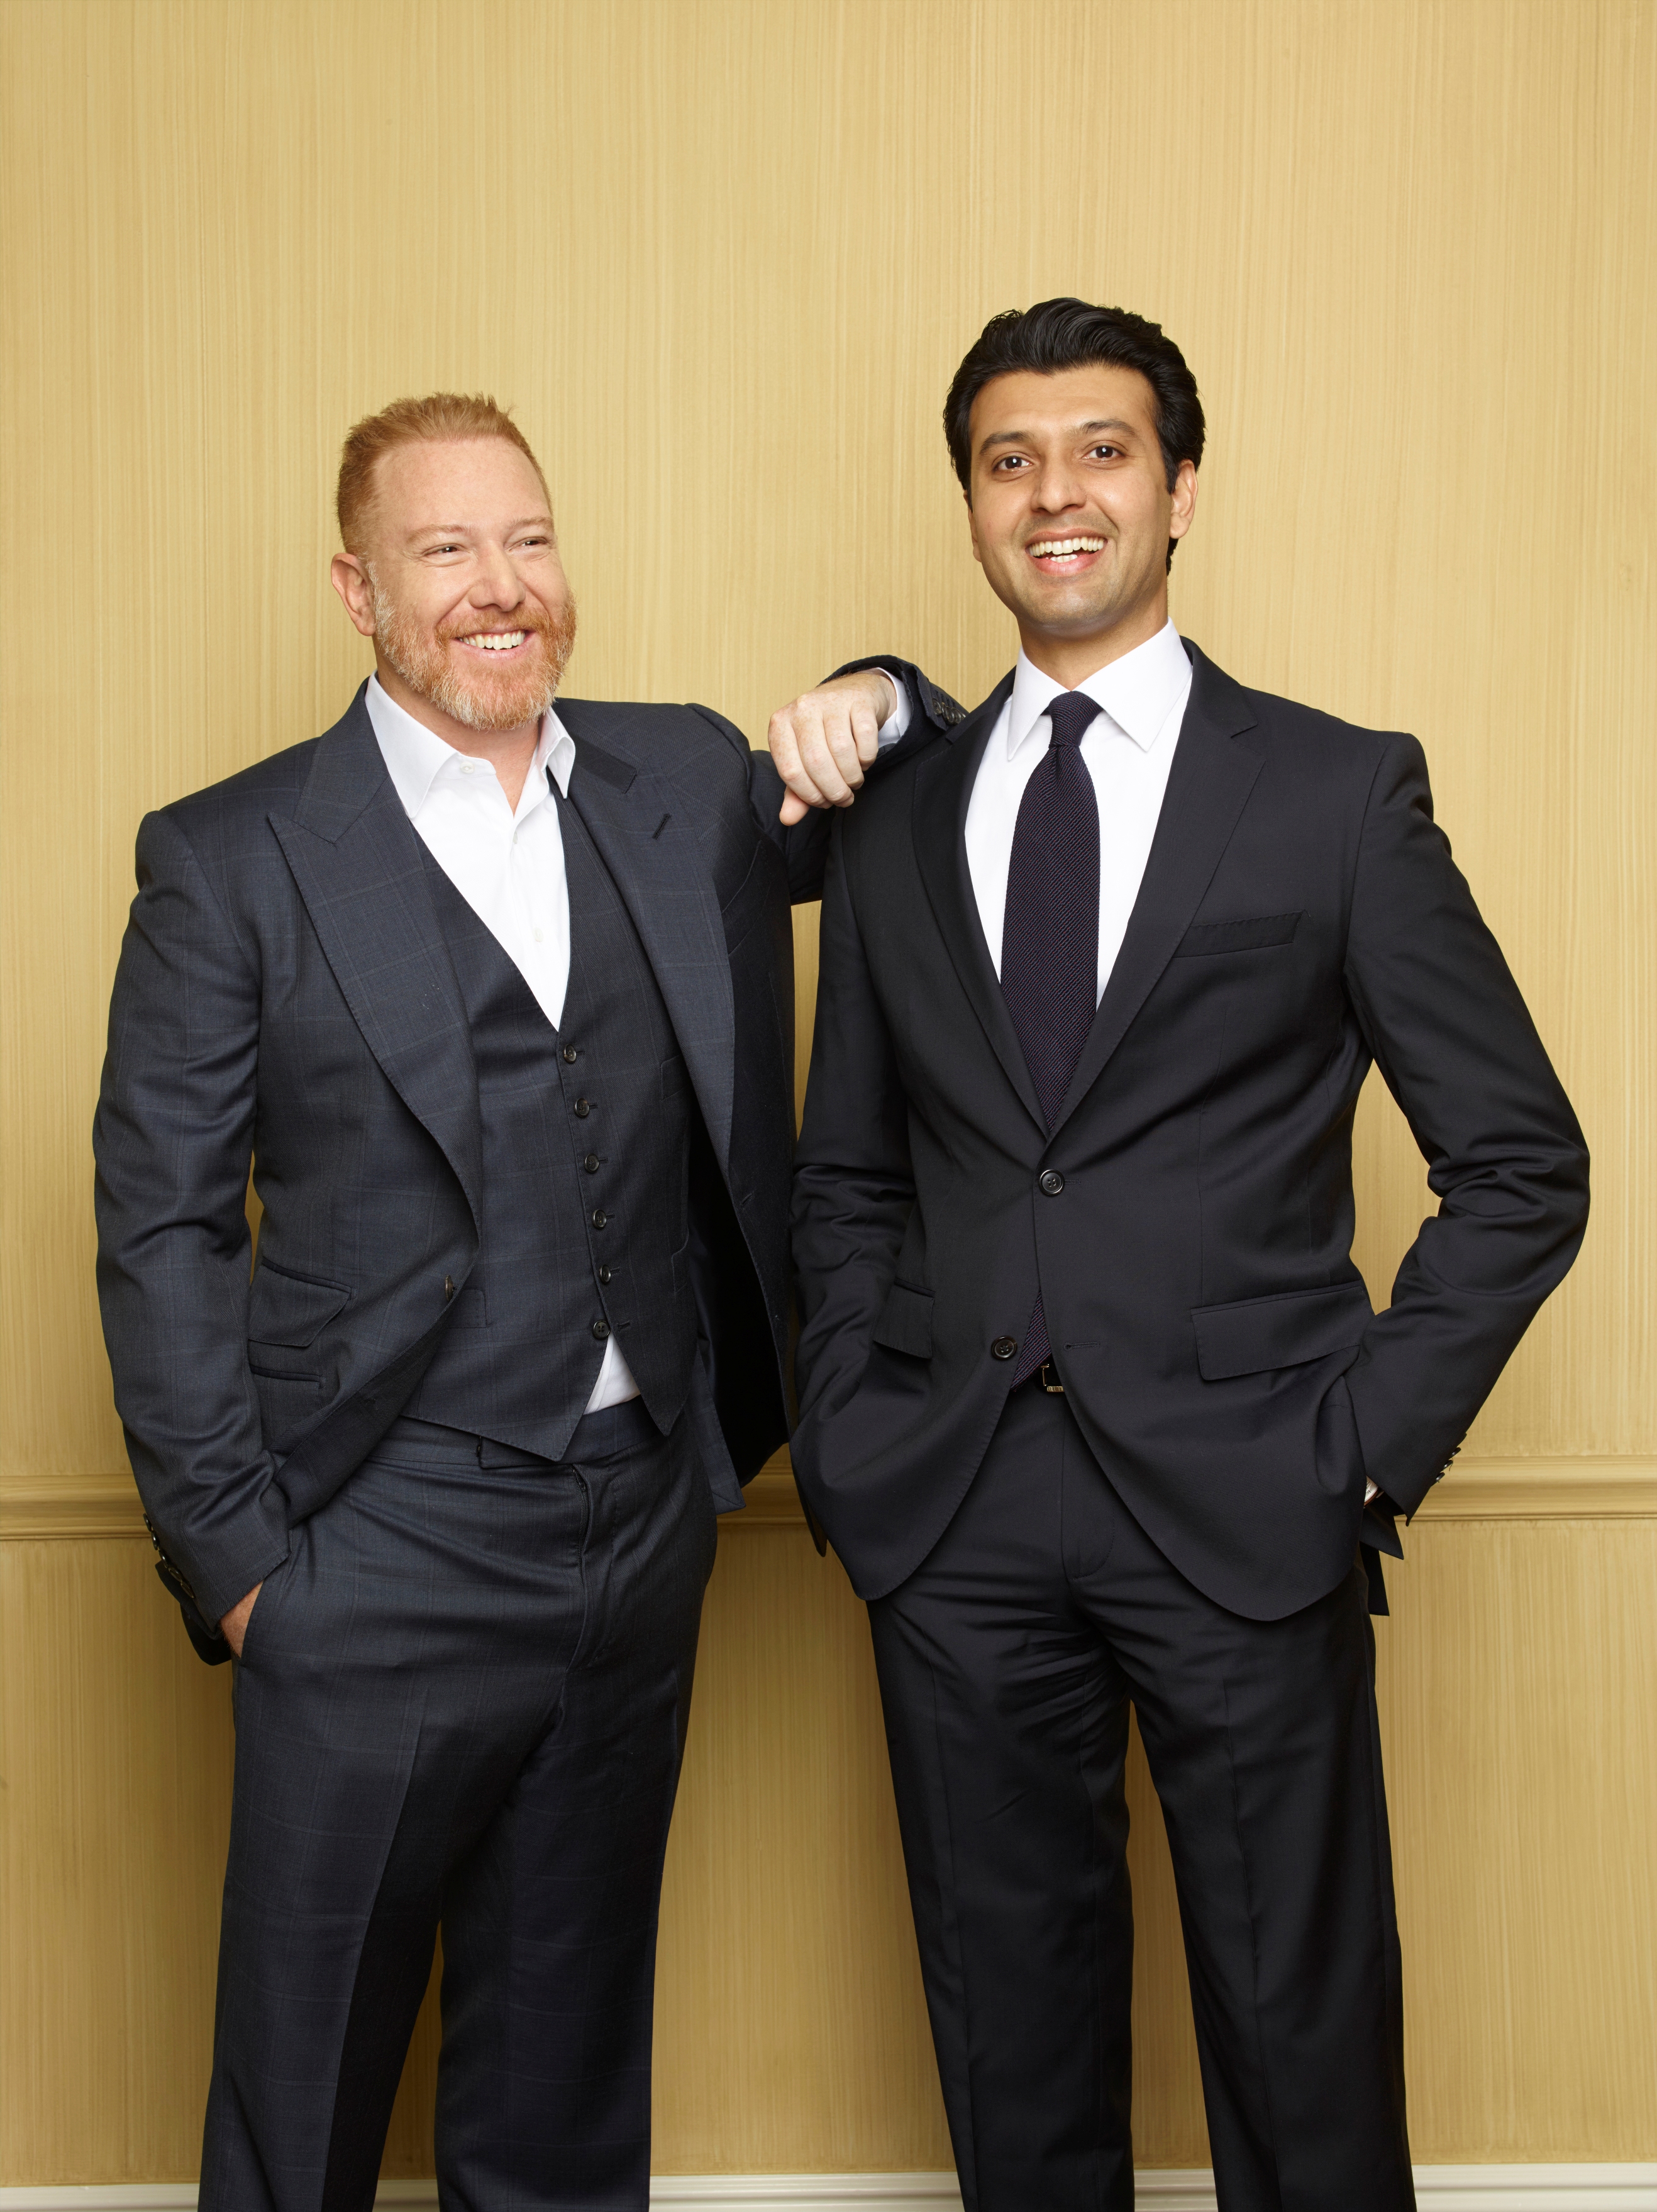 Relativity and B4U announce joint venture in India